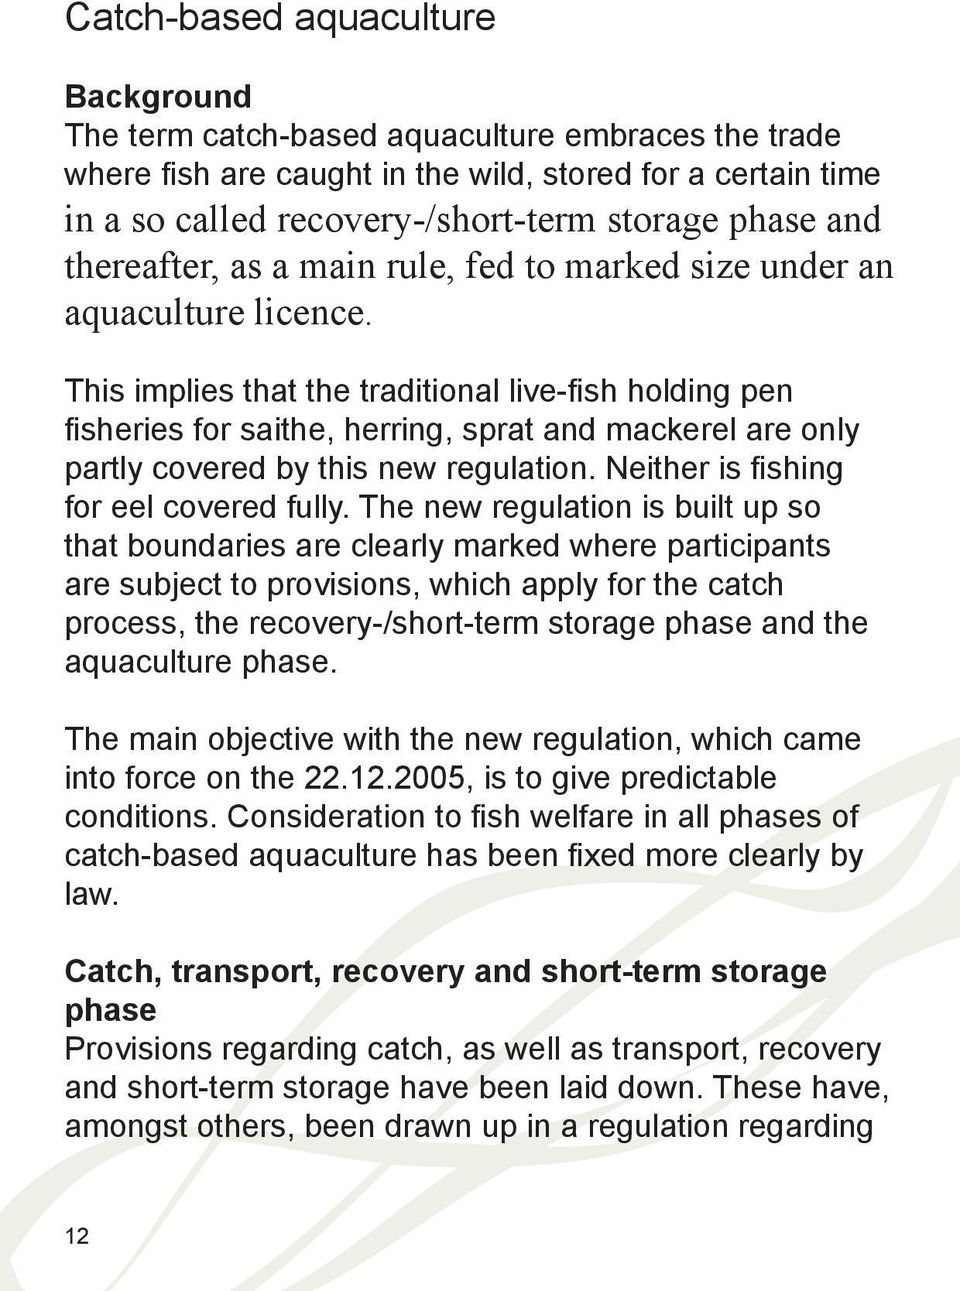 This implies that the traditional live-fish holding pen fisheries for saithe, herring, sprat and mackerel are only partly covered by this new regulation. Neither is fishing for eel covered fully.